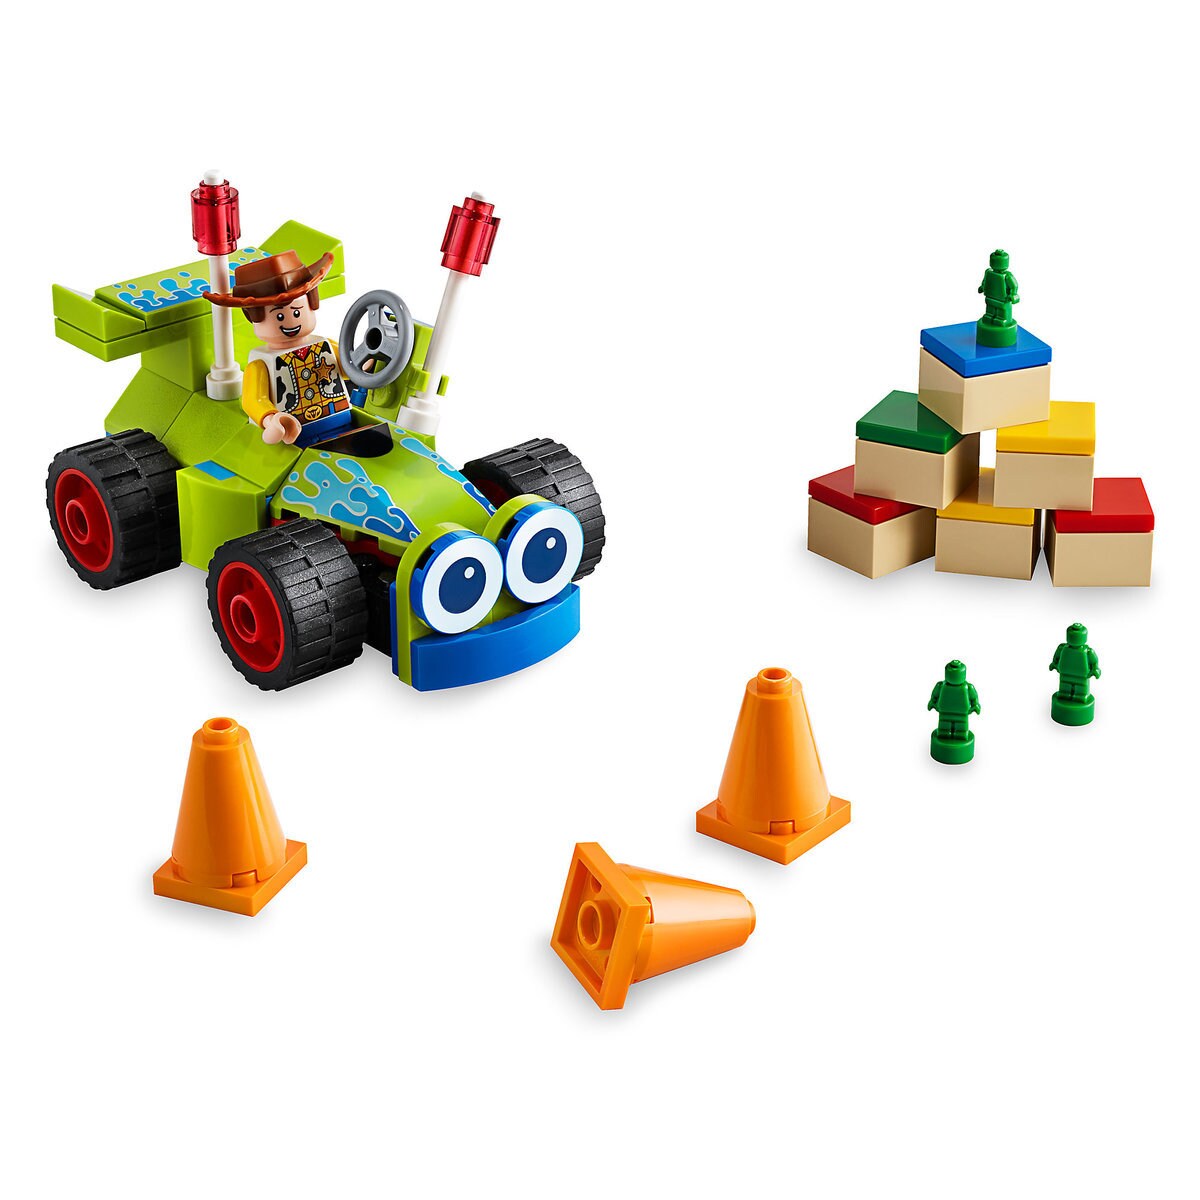 Product Image of Woody & RC Play Set by LEGO - Toy Story 4 # 1